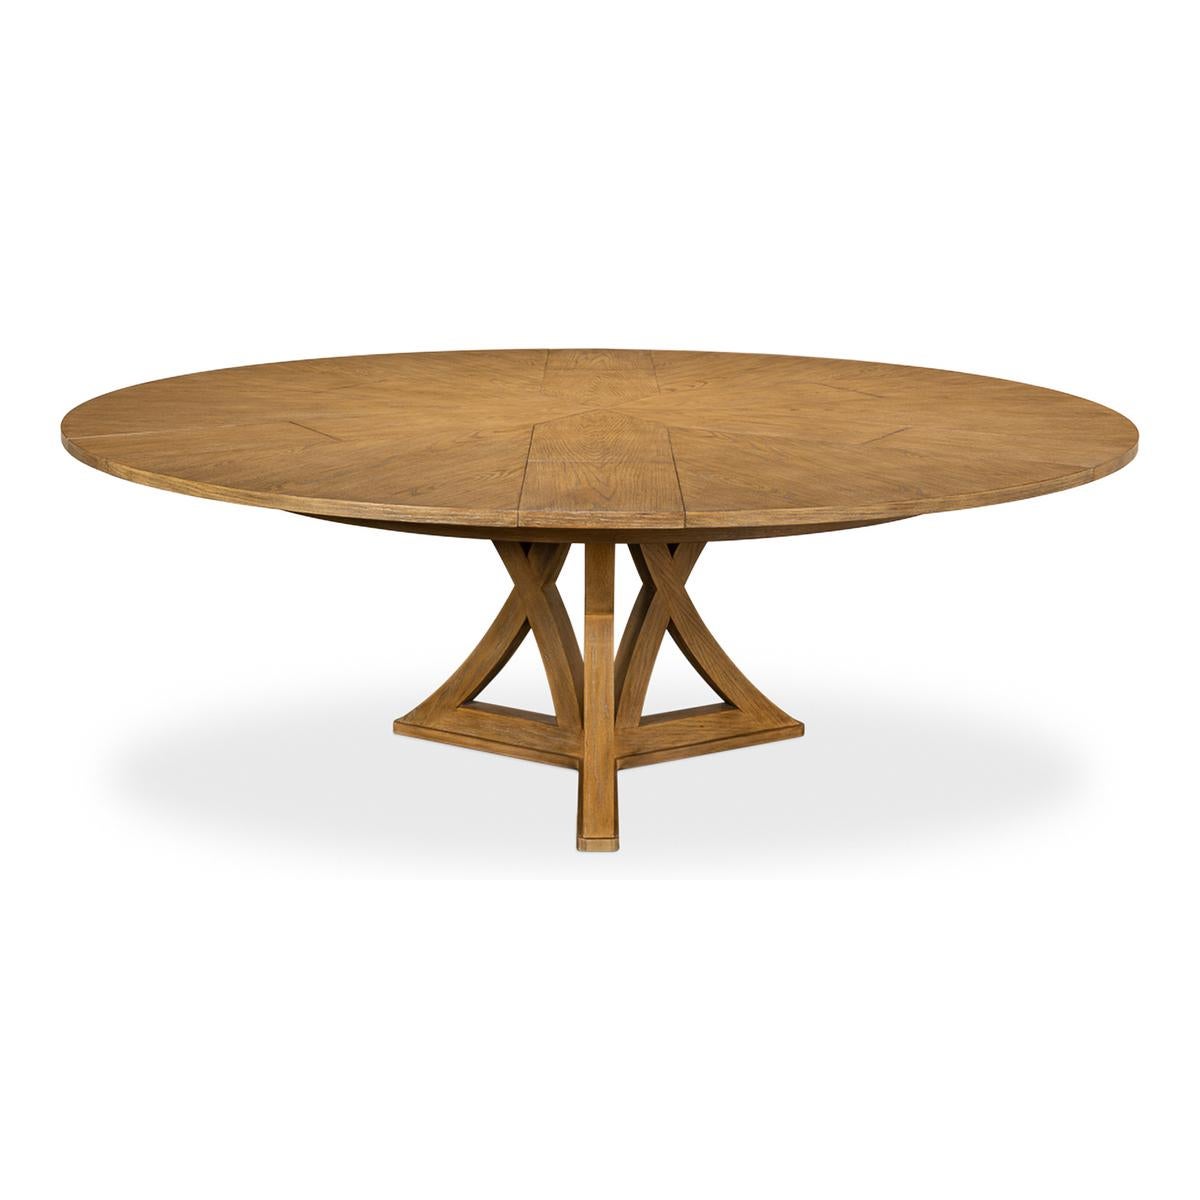 Wood Rustic Round Dining Table, Heather Grey For Sale